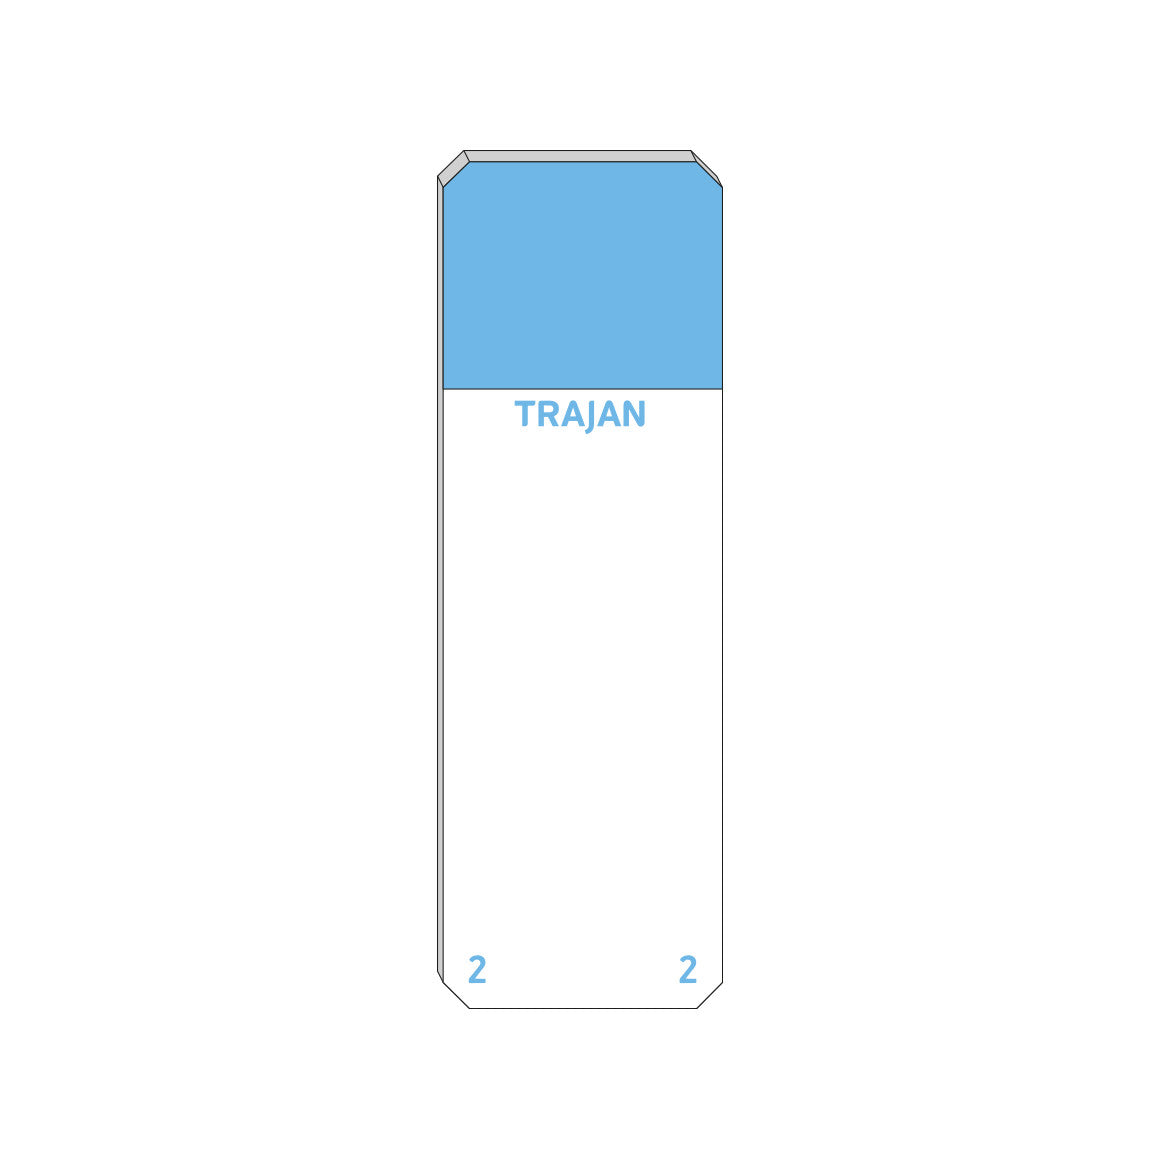 Trajan Scientific and Medical, Series 2 Adhesive Microscope Slides, Blue, Frost 20 mm, 75 mm x 25 mm